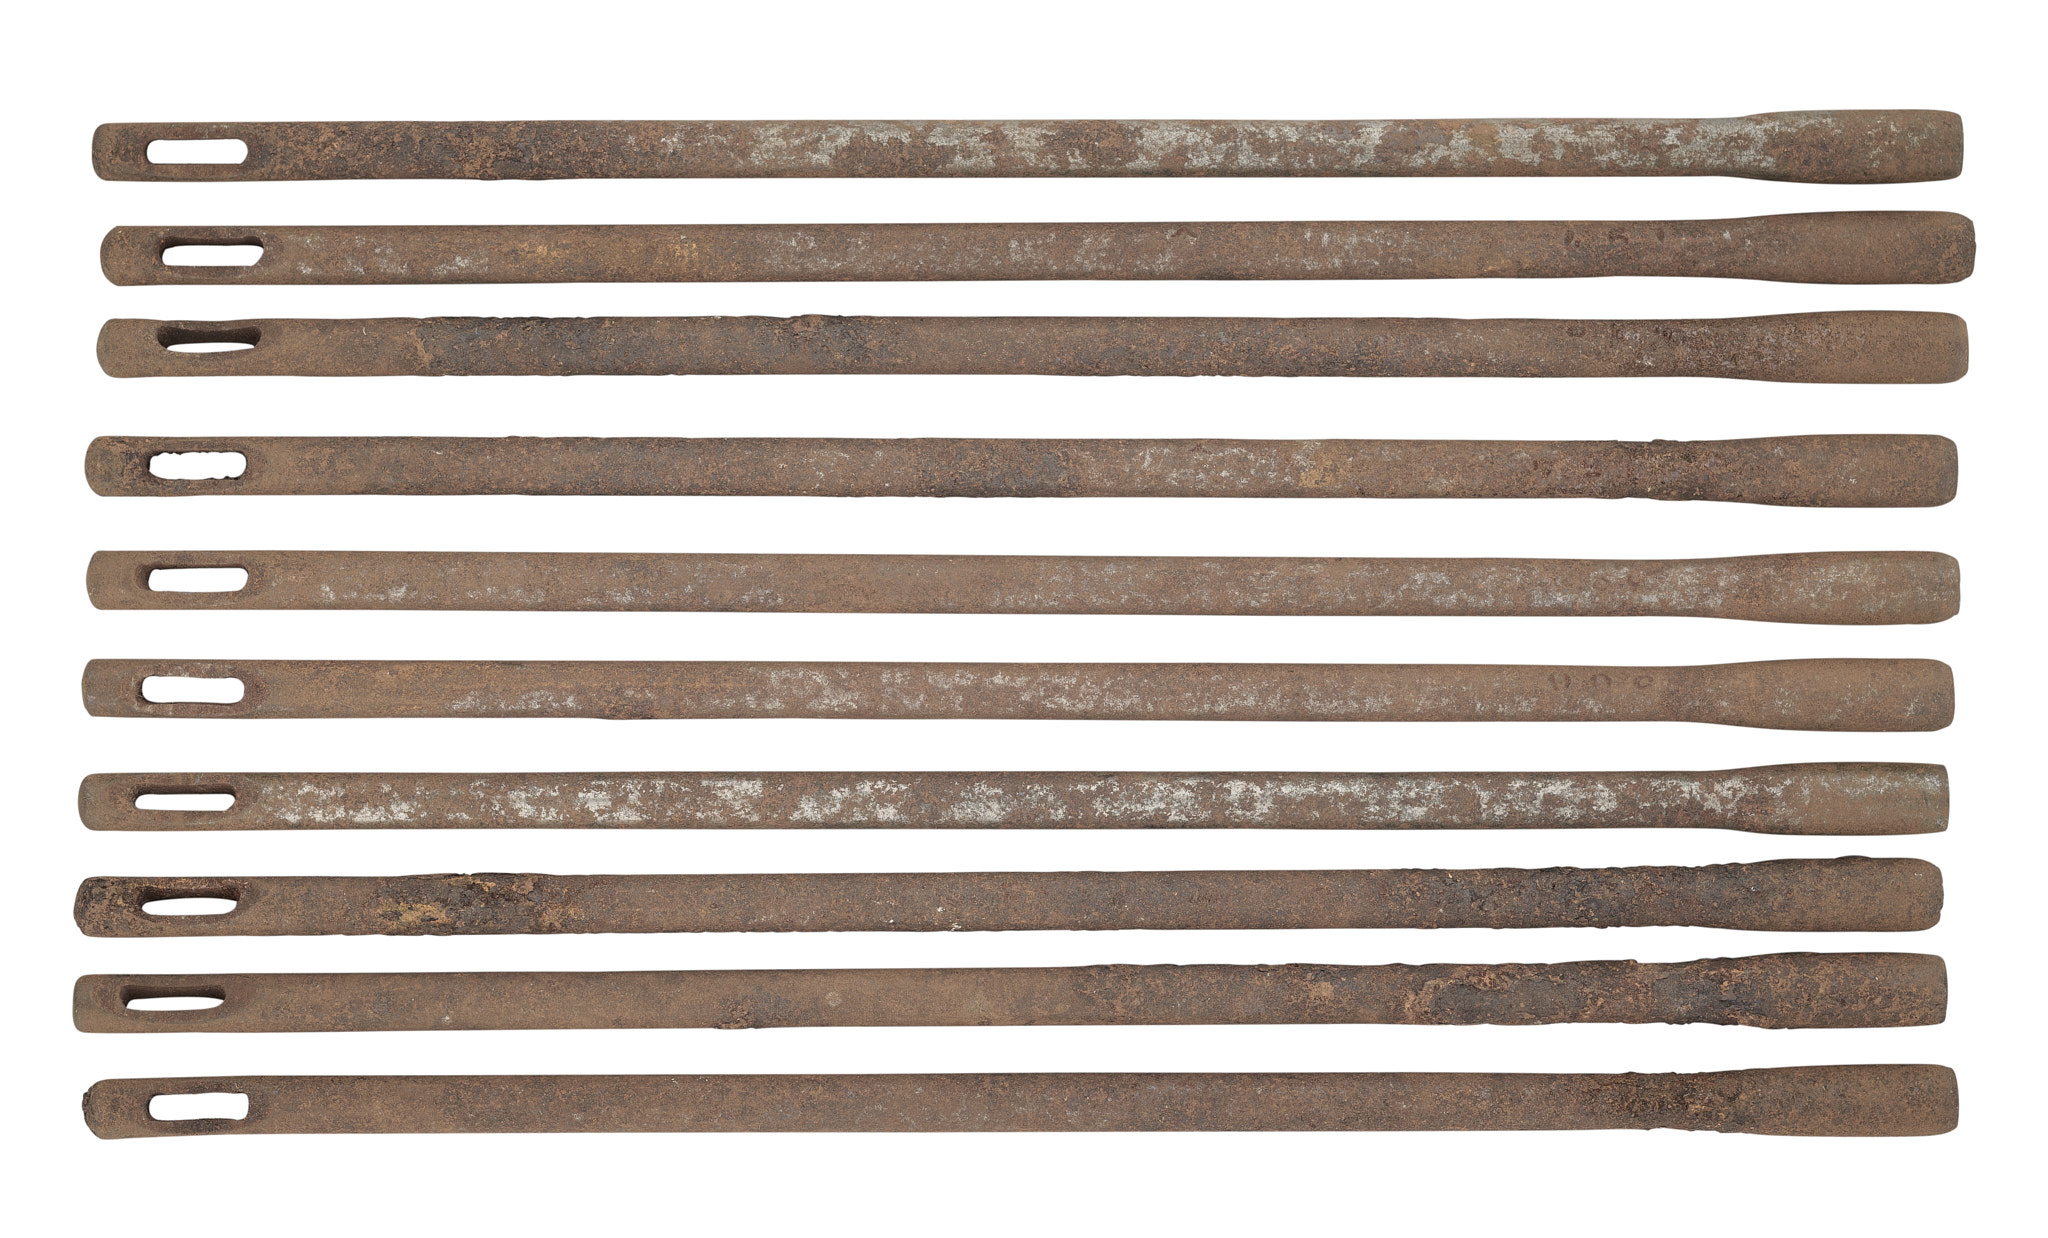 THIRTY-FIVE IRON CLEANING RODS FOR PISTOLS, 19TH CENTURY